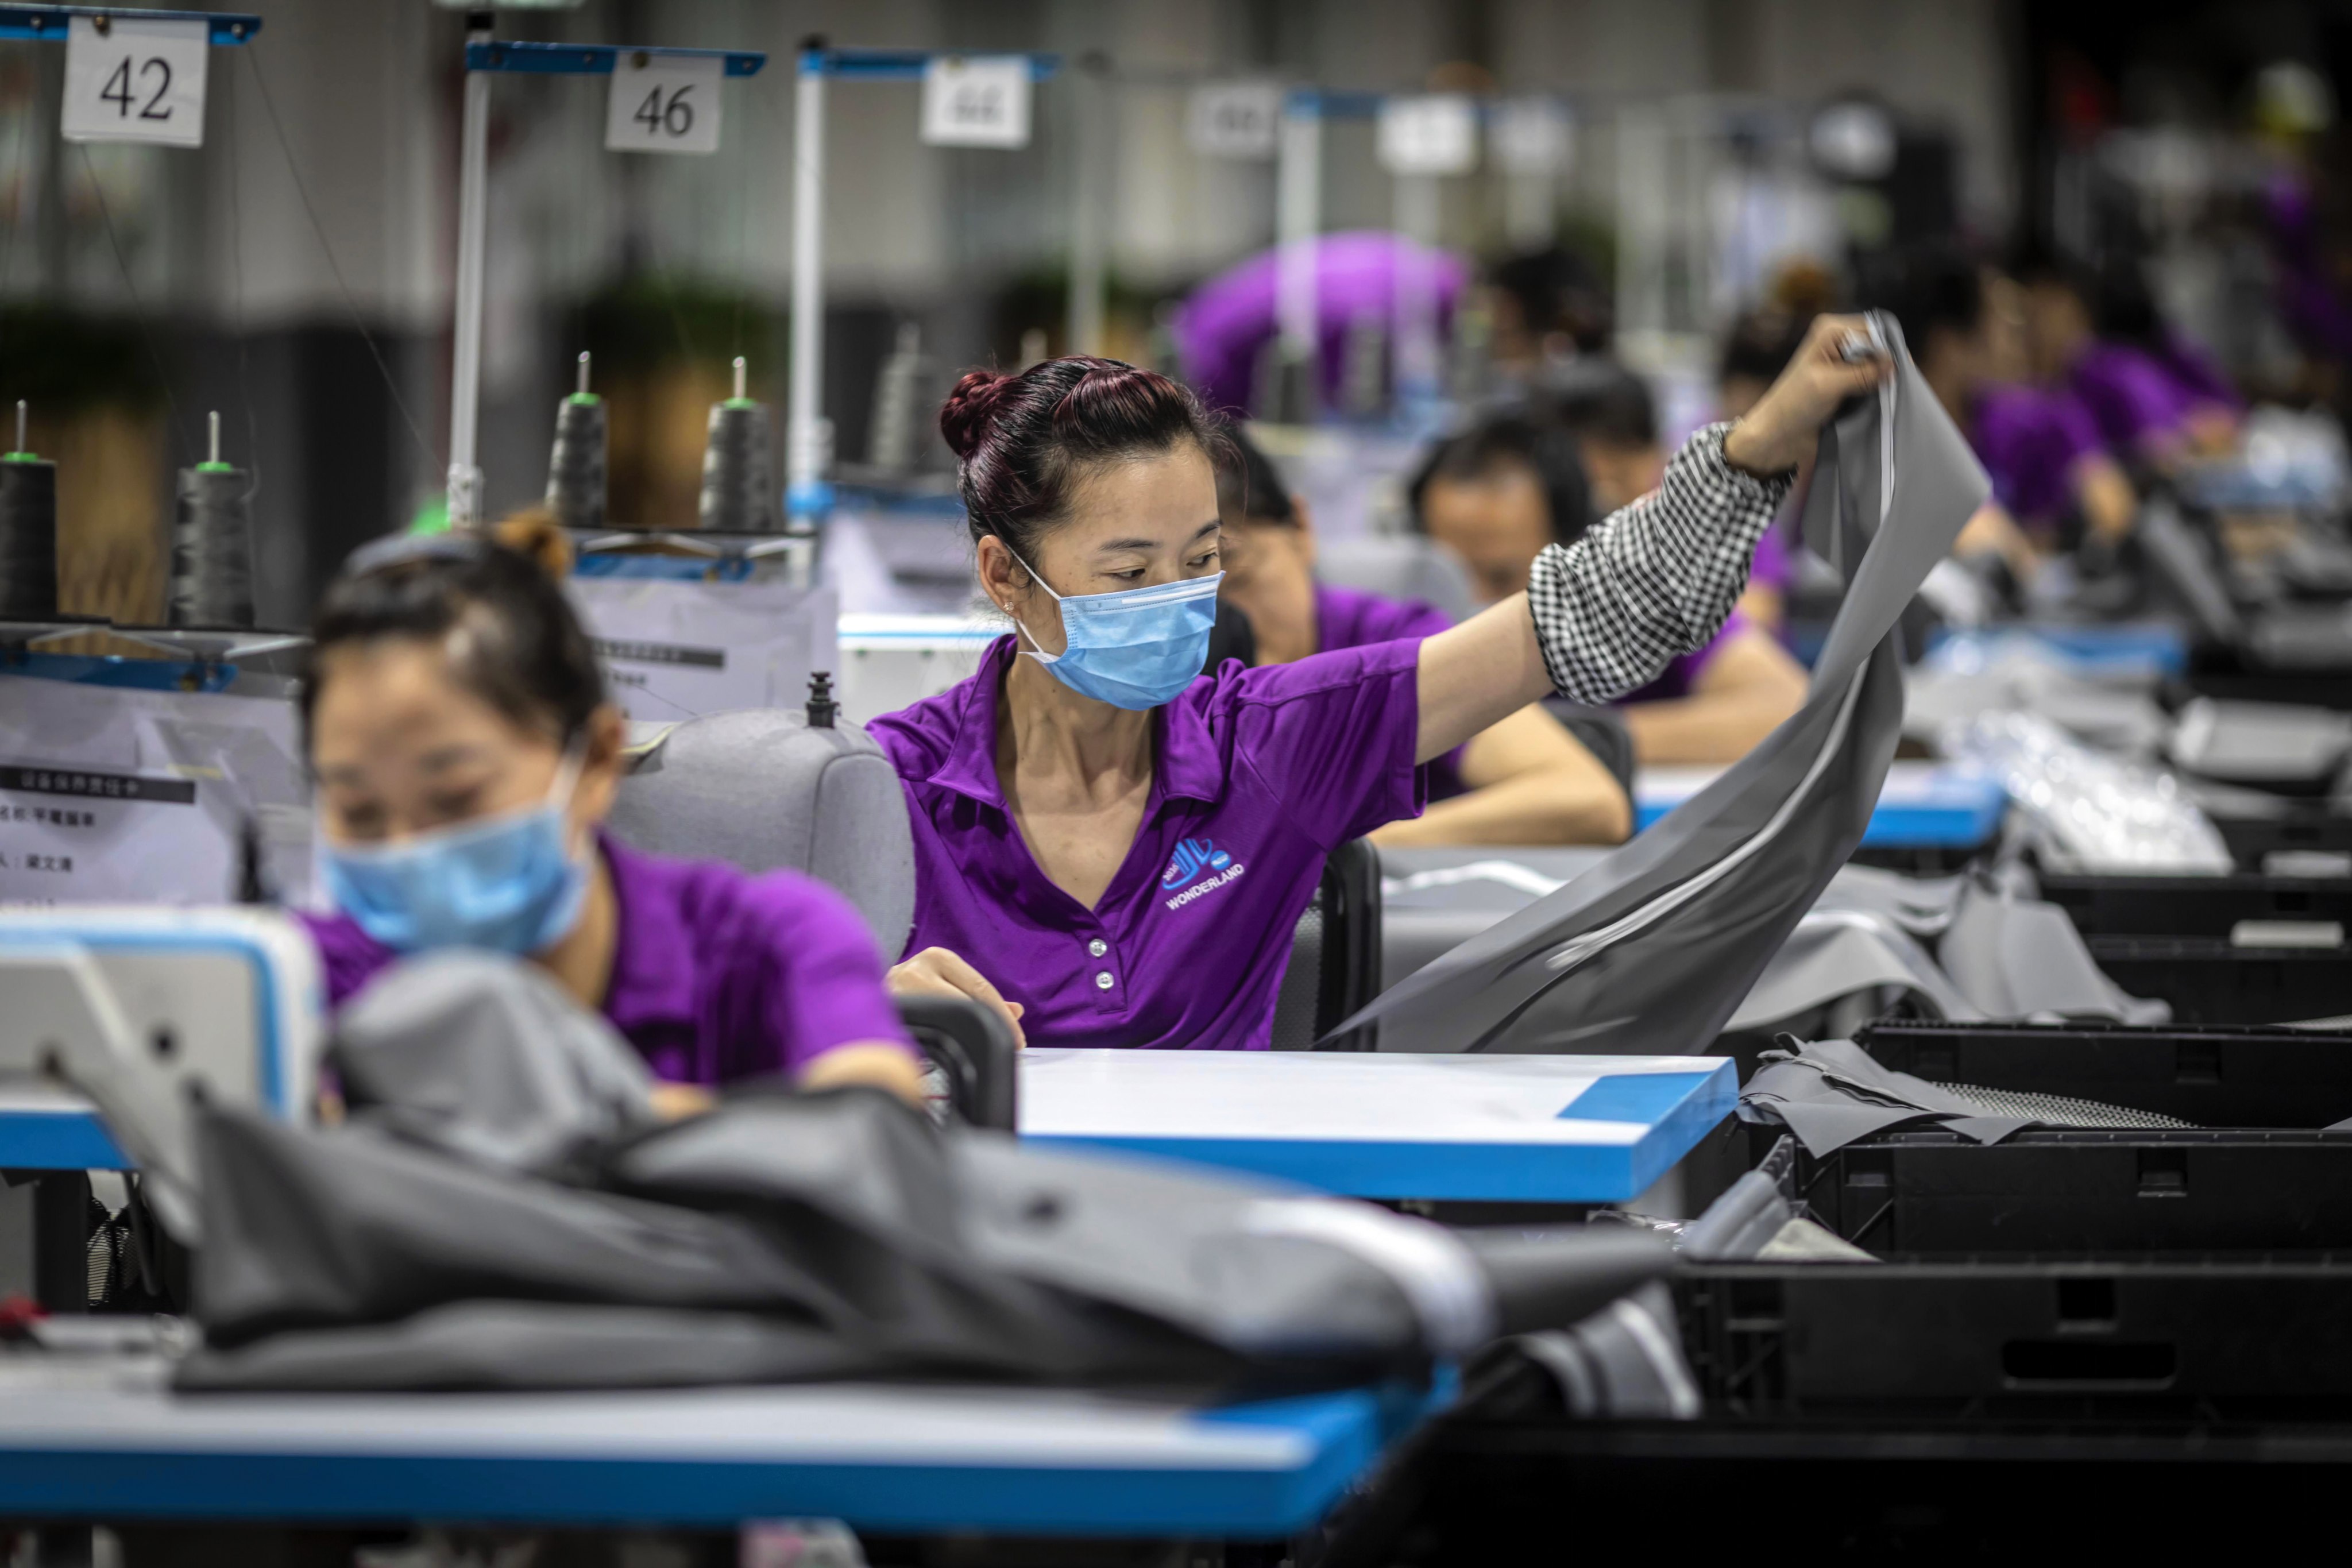 China’s female labour force participation rate – the proportion of those aged 15 and older that are economically active – declined from 61.4 per cent in 2019 to 60.5 last year, according to the World Bank. Photo: EPA-EFE